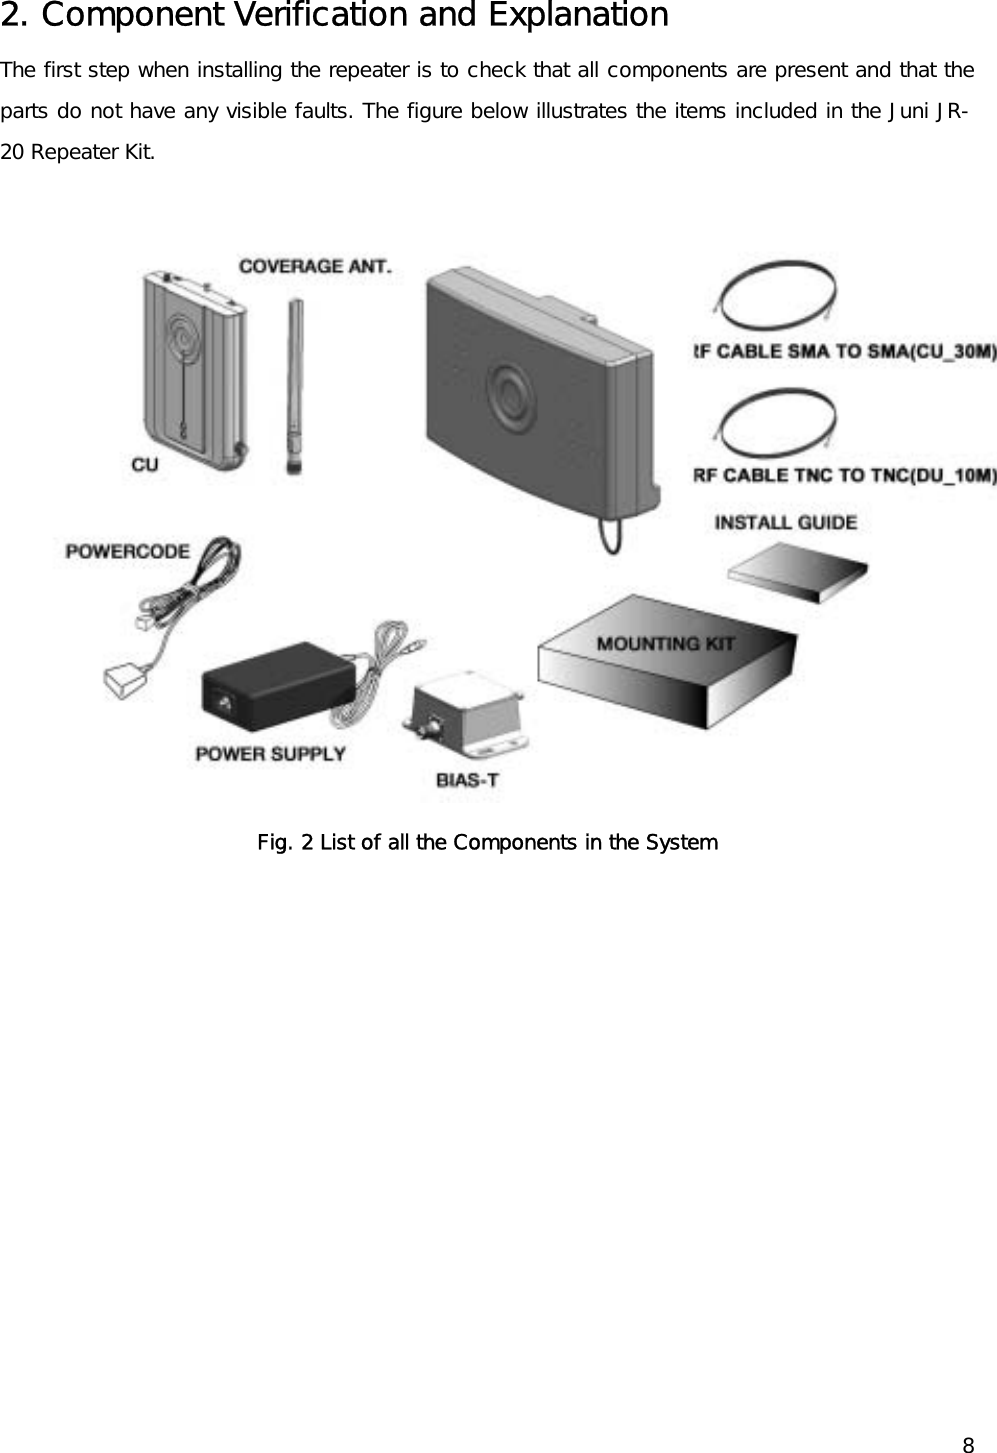    82. Component Verification and Explanation The first step when installing the repeater is to check that all components are present and that the parts do not have any visible faults. The figure below illustrates the items included in the Juni JR-20 Repeater Kit.   Fig. 2 List of all the Components in the System   